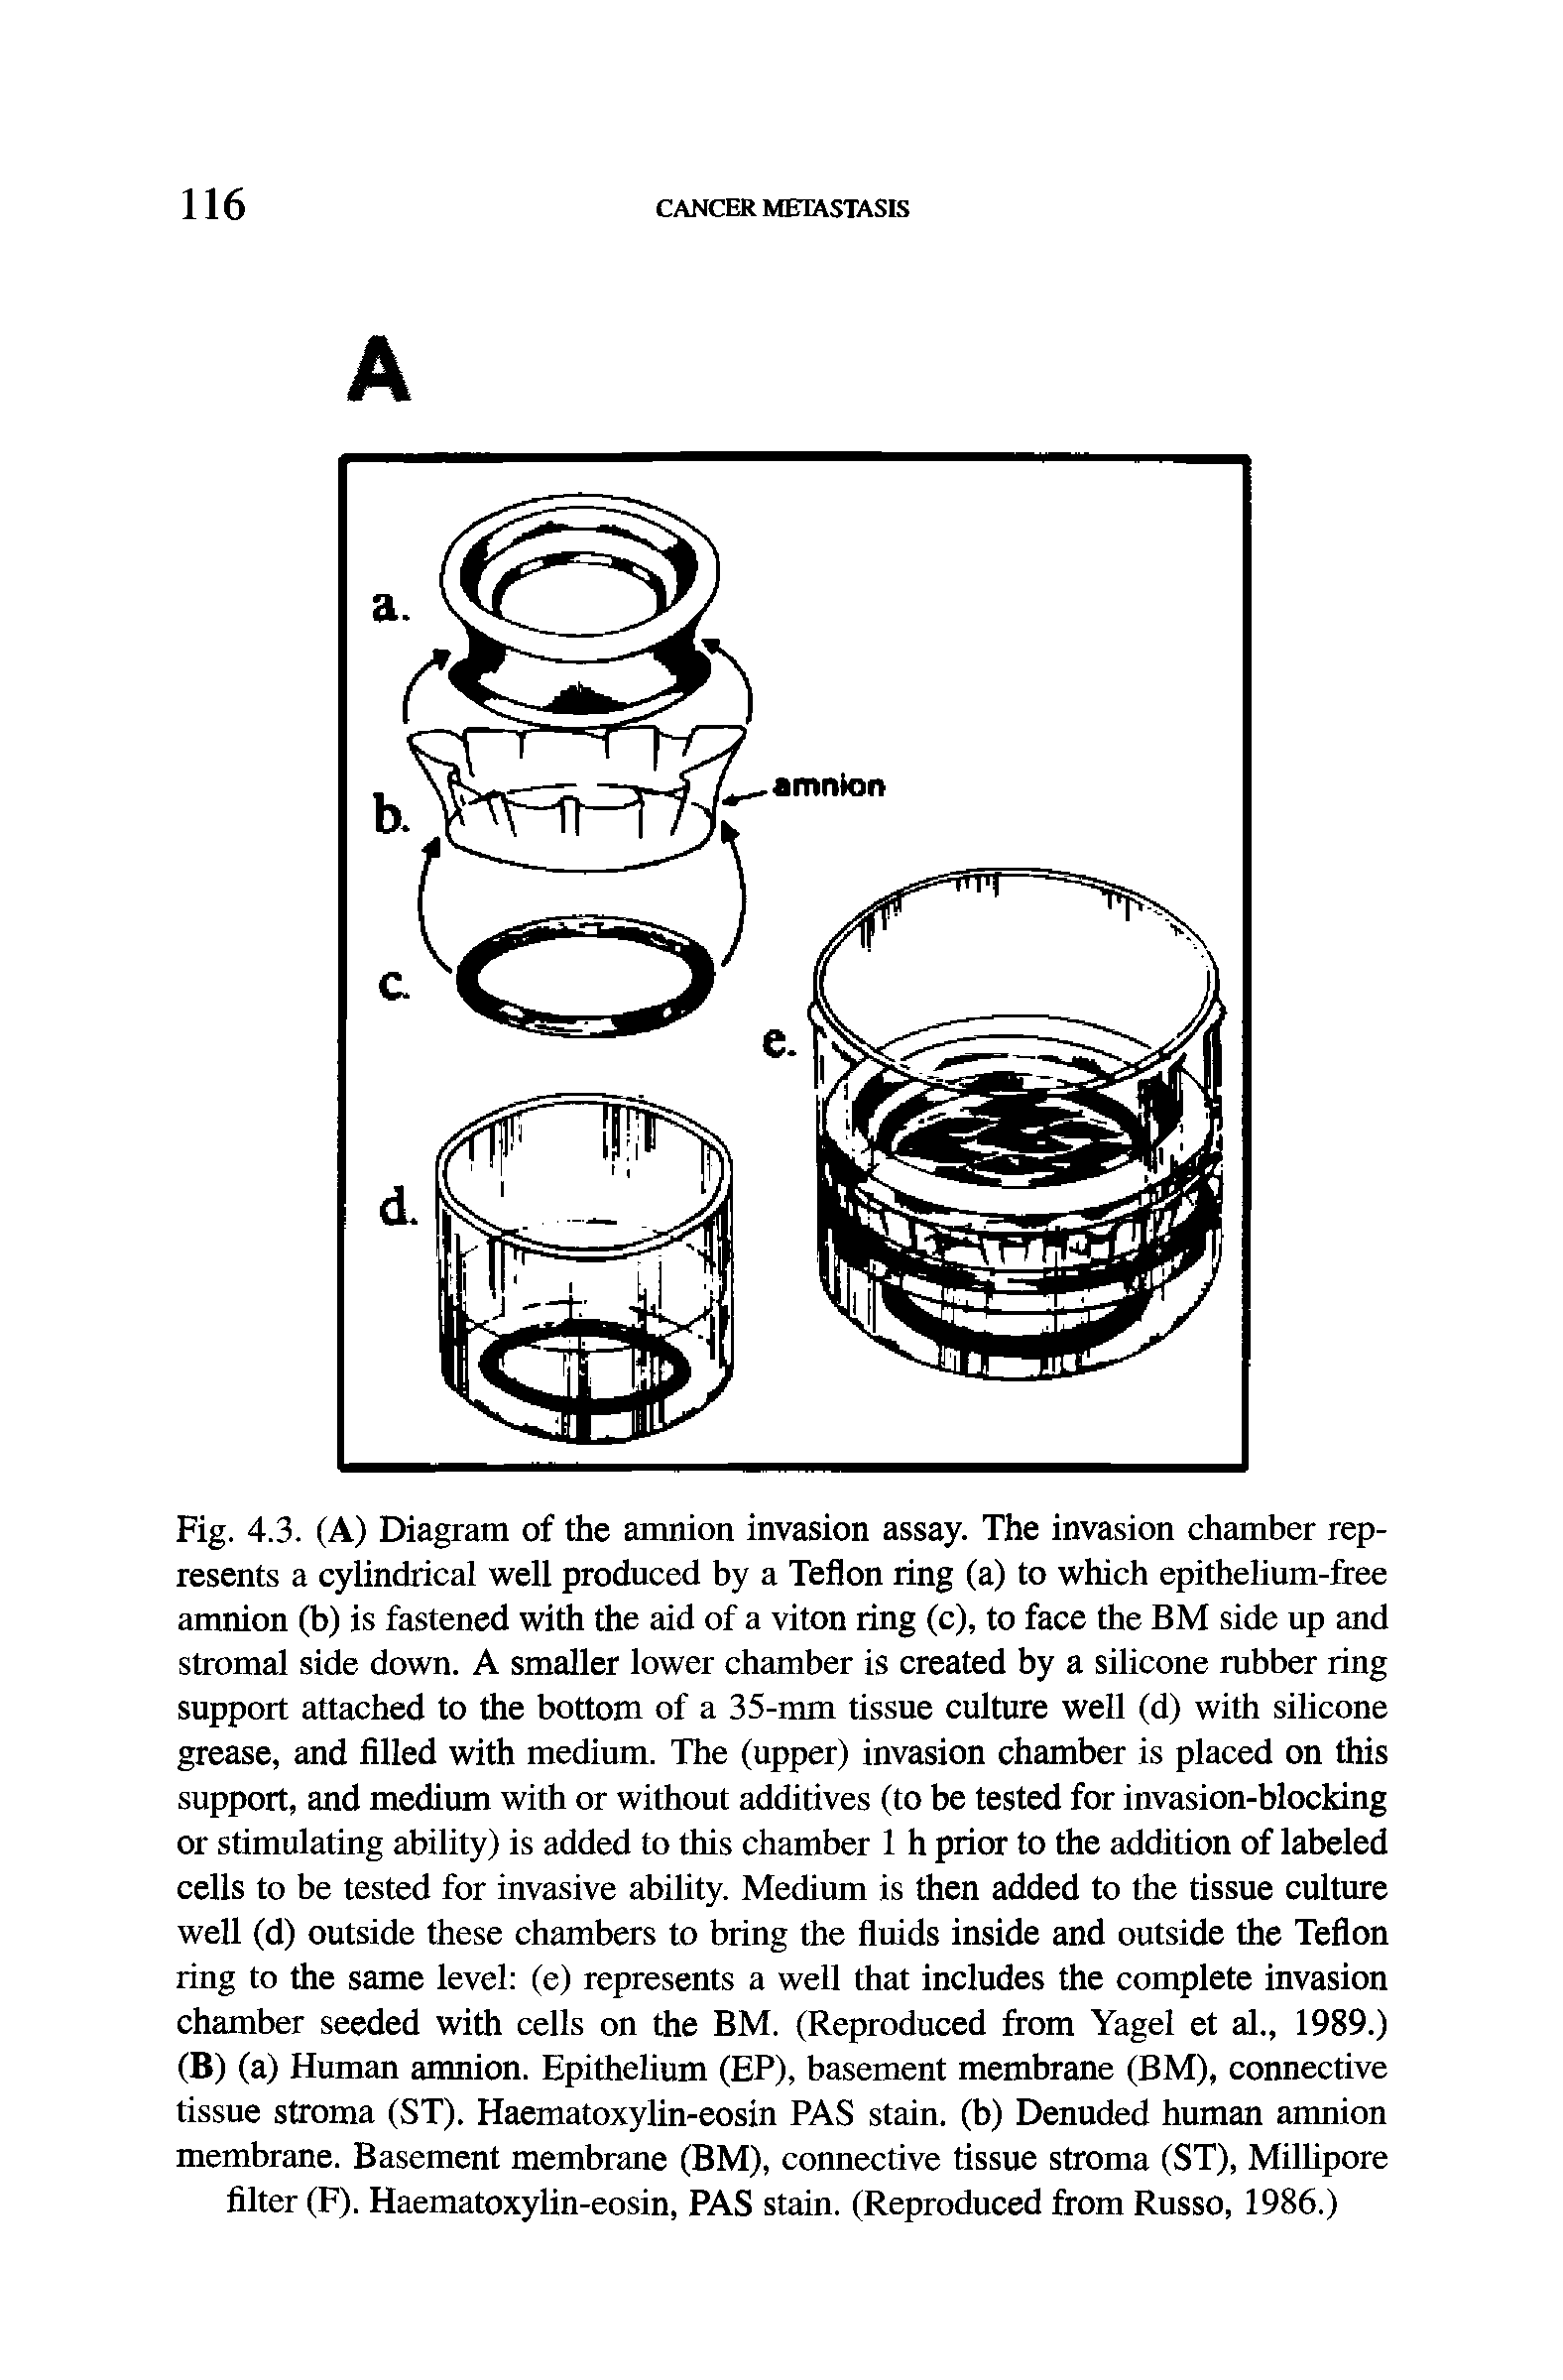 Fig. 4.3. (A) Diagram of the amnion invasion assay. The invasion chamber represents a cylindrical well produced by a Teflon ring (a) to which epithelium-free amnion (b) is fastened with the aid of a viton ring (c), to face the BM side up and stromal side down. A smaller lower chamber is created by a silicone rubber ring support attached to the bottom of a 35-mm tissue culture well (d) with silicone grease, and filled with medium. The (upper) invasion chamber is placed on this support, and medium with or without additives (to be tested for invasion-blocking or stimulating ability) is added to this chamber 1 h prior to the addition of labeled cells to be tested for invasive ability. Medium is then added to the tissue culture well (d) outside these chambers to bring the fiuids inside and outside the Teflon ring to the same level (e) represents a well that includes the complete invasion chamber seeded with cells on the BM. (Reproduced from Yagel et al., 1989.) (B) (a) Human amnion. Epithelium (EP), basement membrane (BM), connective tissue stroma (ST). Haematoxylin-eosin PAS stain, (b) Denuded human amnion membrane. Basement membrane (BM), connective tissue stroma (ST), Milfipore filter (F). Haematoxylin-eosin, PAS stain. (Reproduced from Russo, 1986.)...